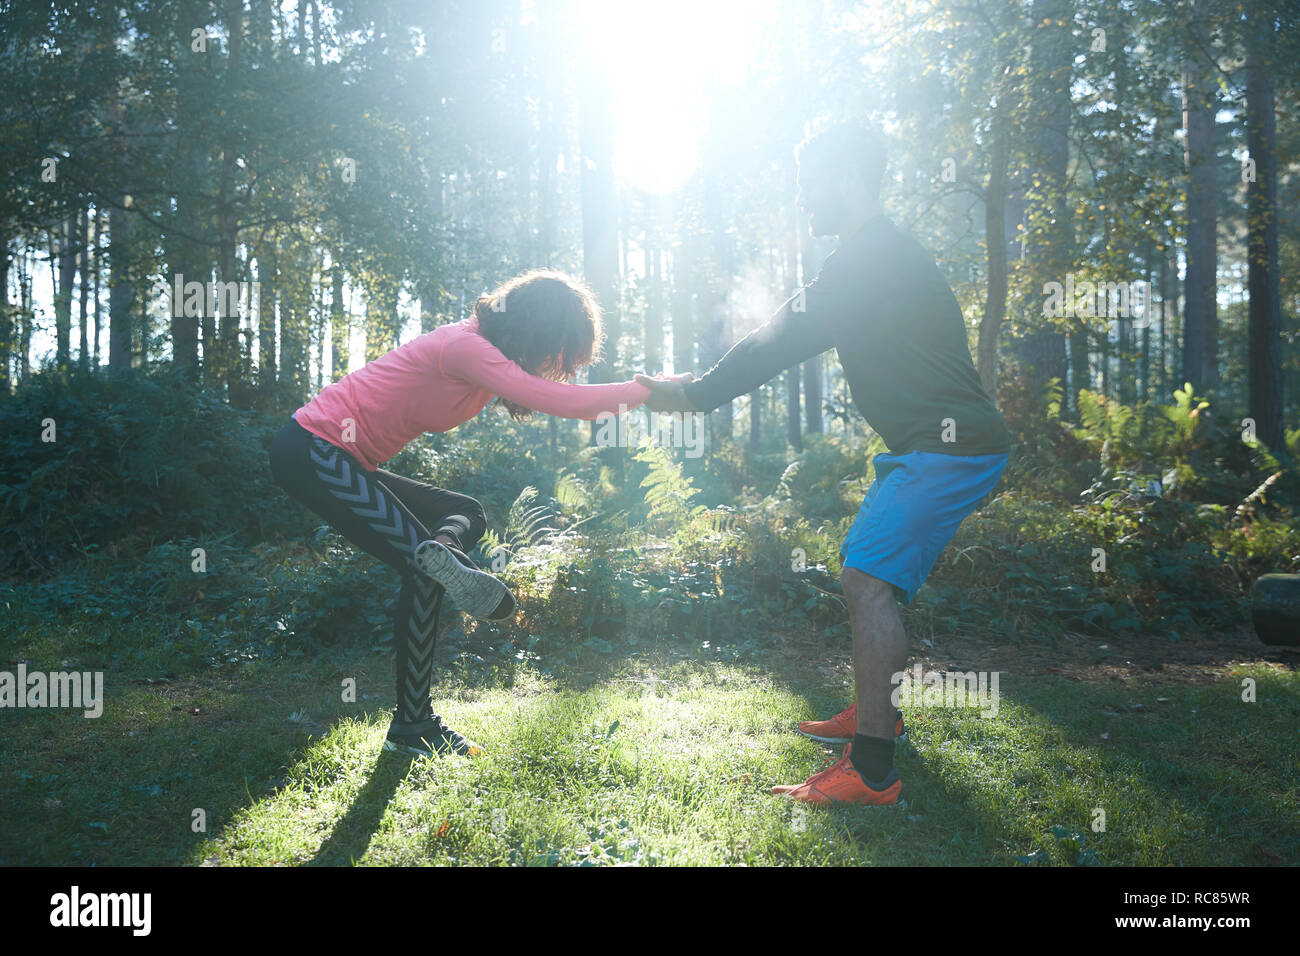 Male and female runners stretching legs and warming up in sunlit forest Stock Photo